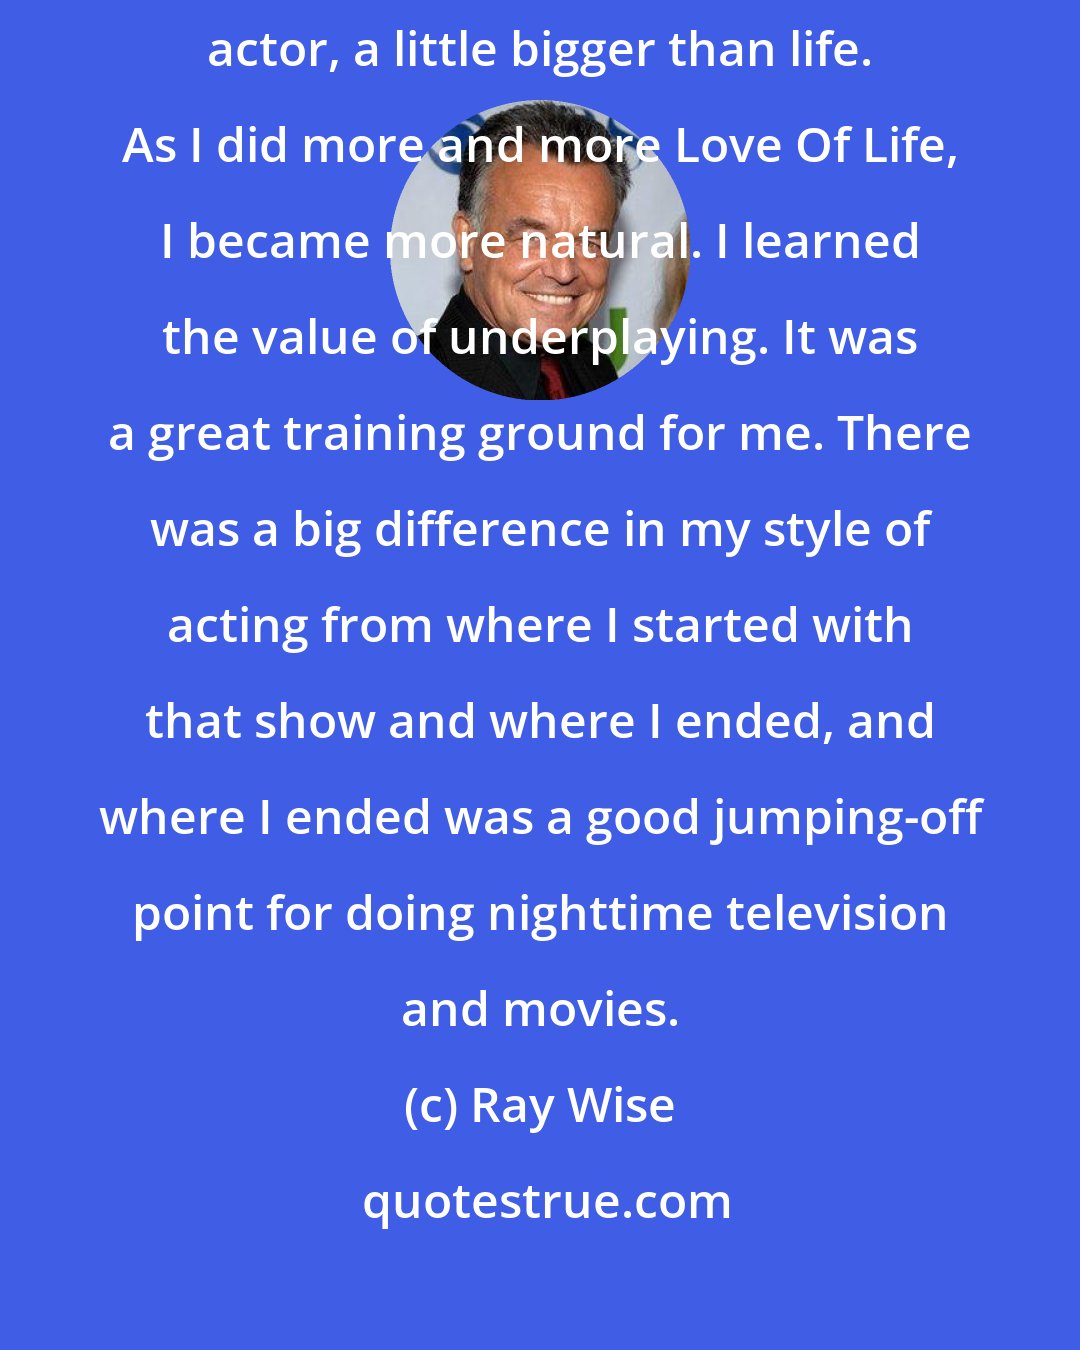 Ray Wise: When I first started out on the soap, I was more theatrical, like a stage actor, a little bigger than life. As I did more and more Love Of Life, I became more natural. I learned the value of underplaying. It was a great training ground for me. There was a big difference in my style of acting from where I started with that show and where I ended, and where I ended was a good jumping-off point for doing nighttime television and movies.